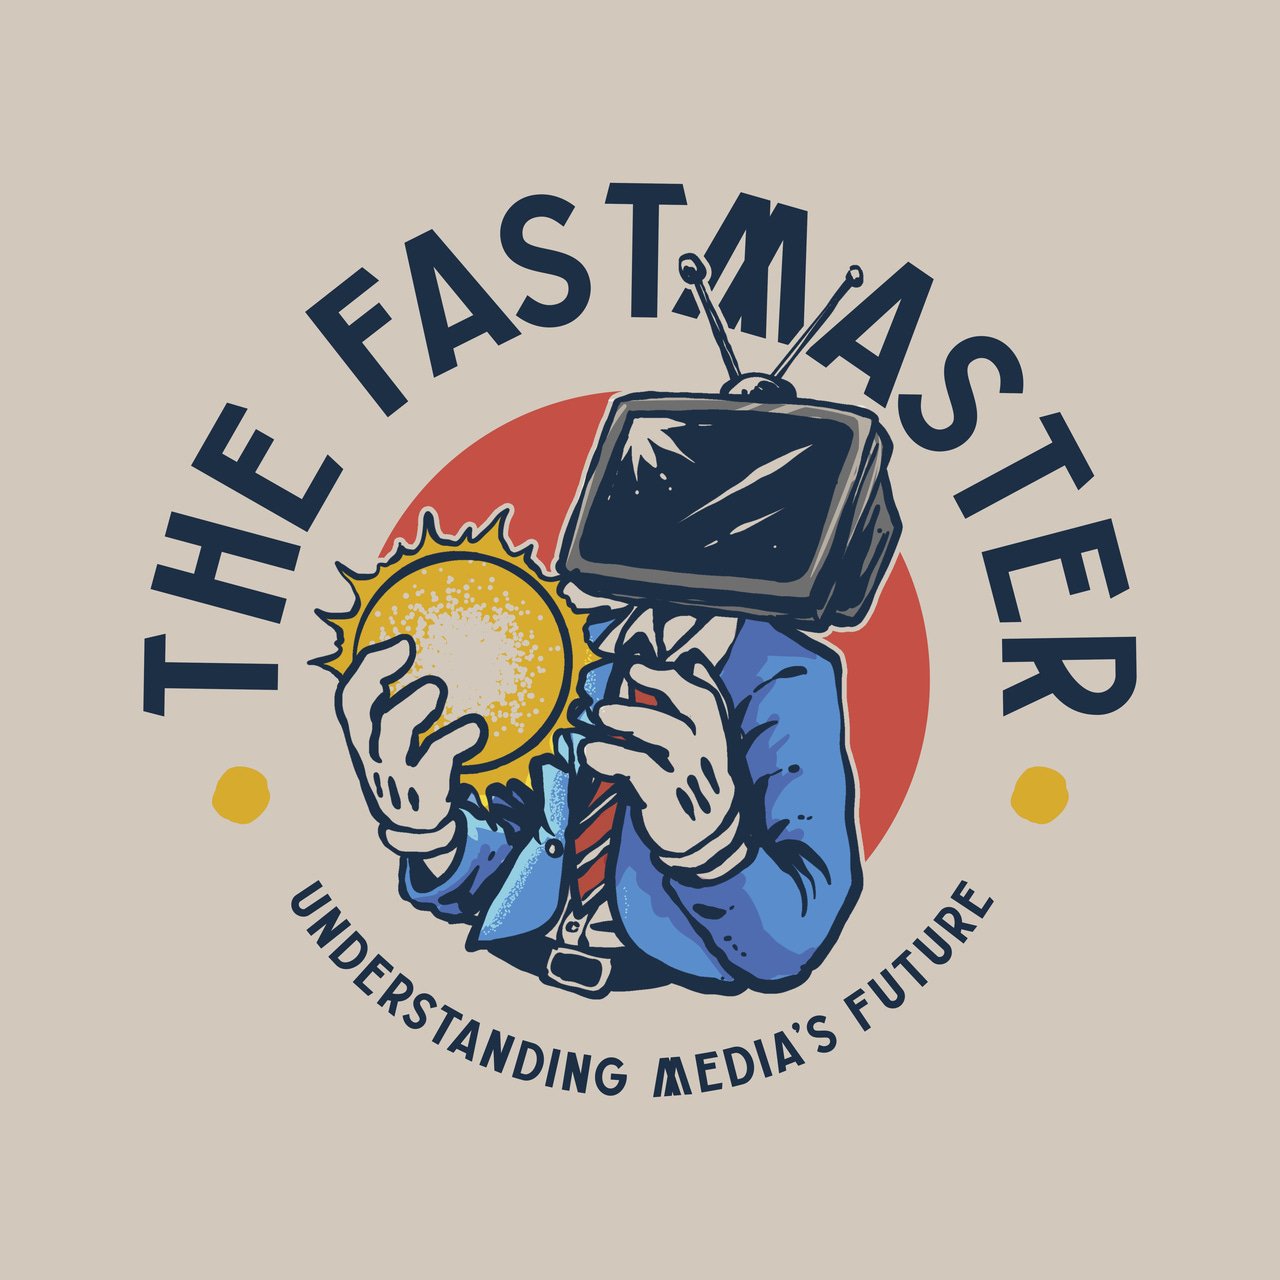 The FASTMaster